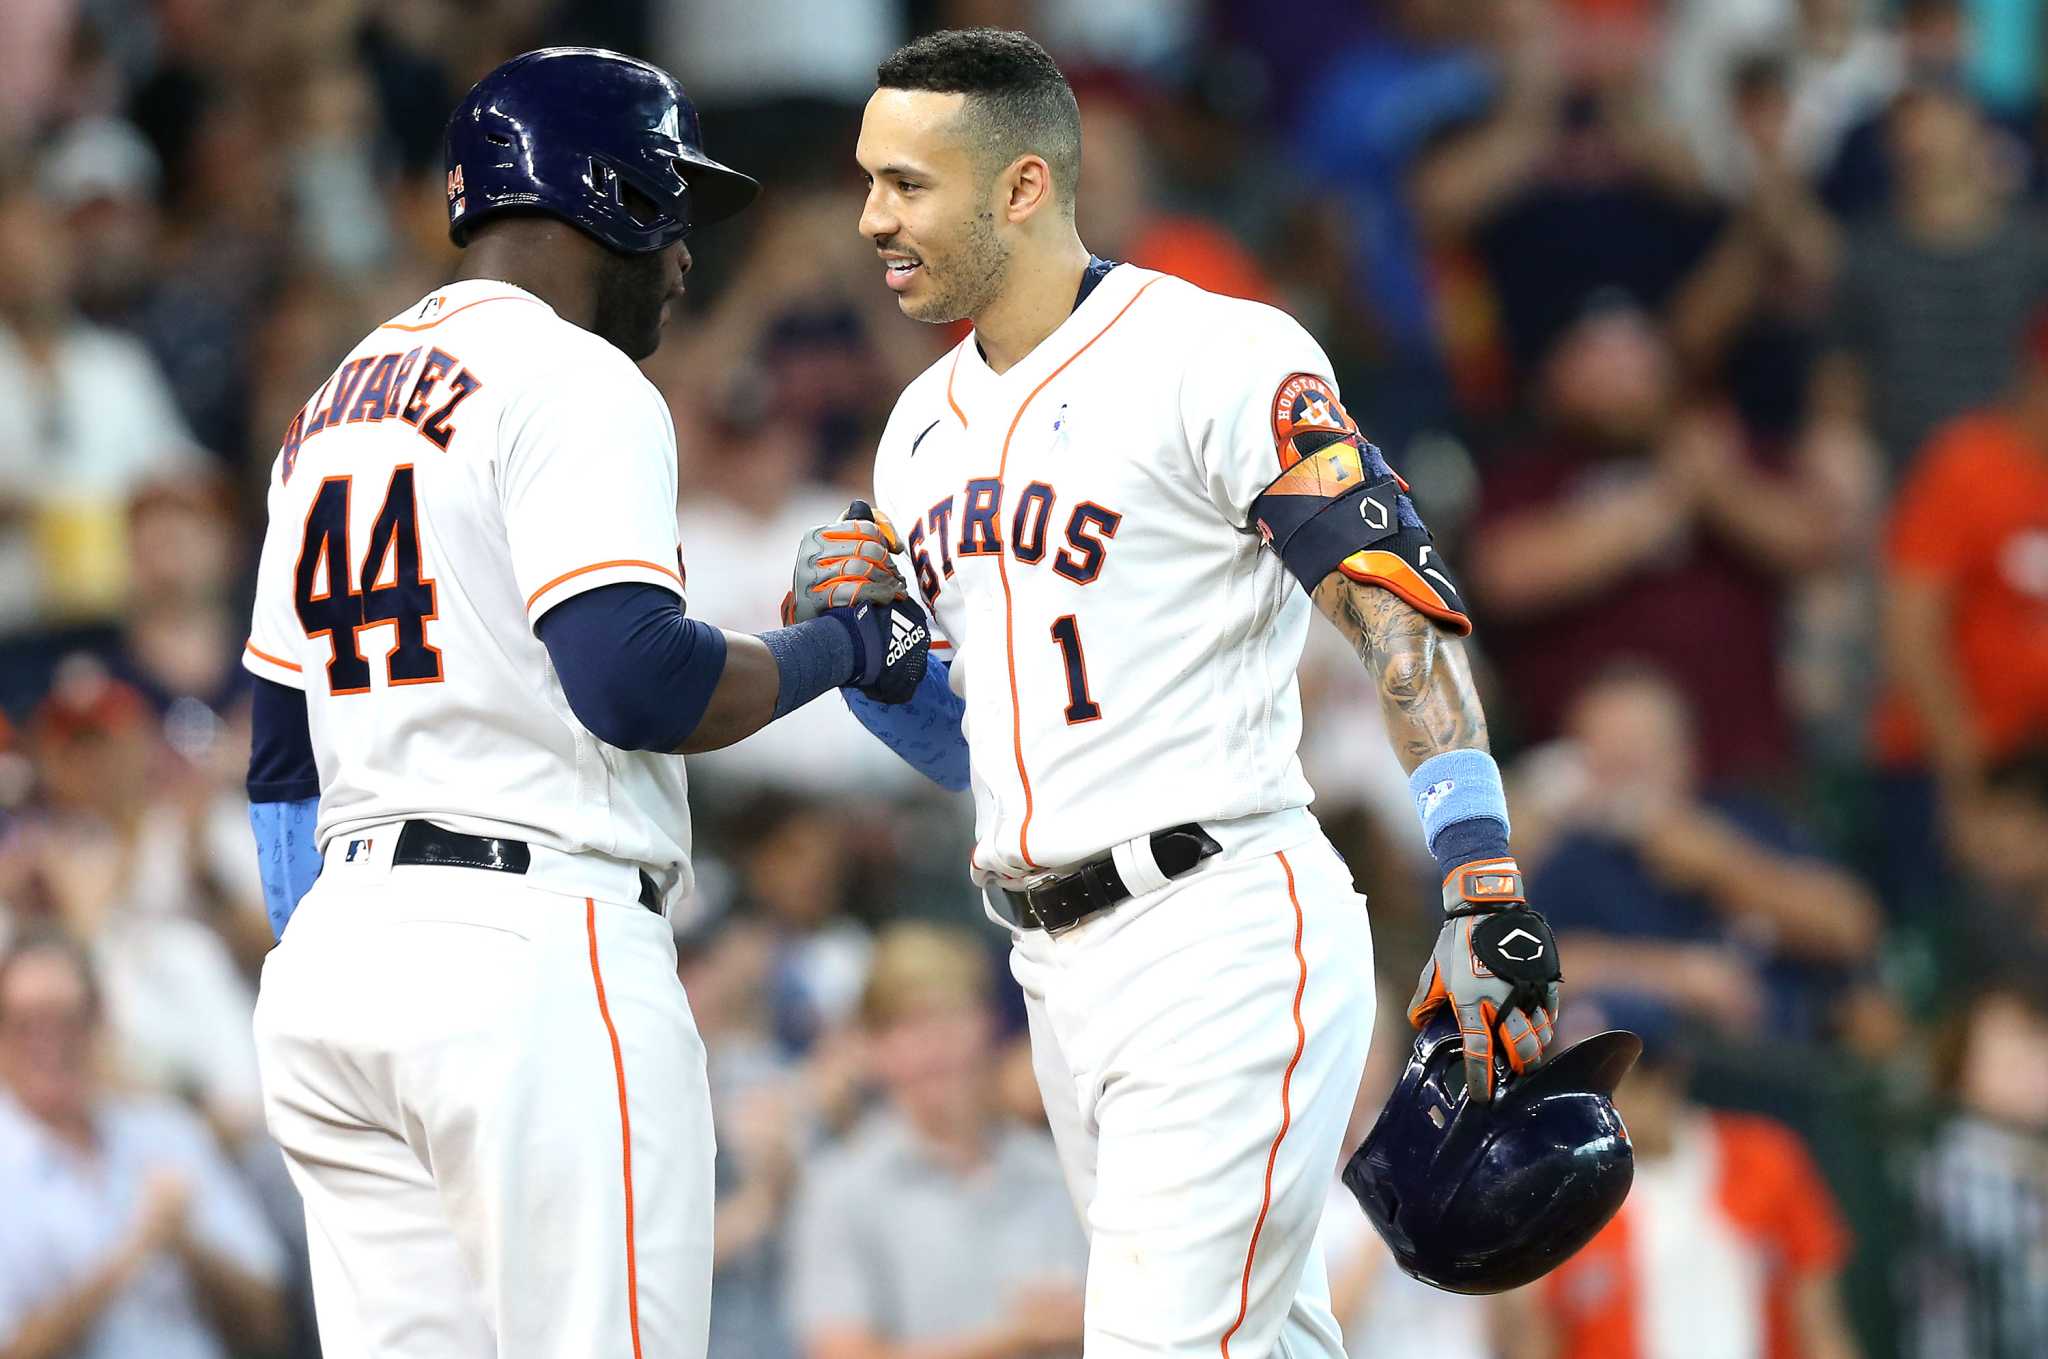 7th straight win puts Astros in first place